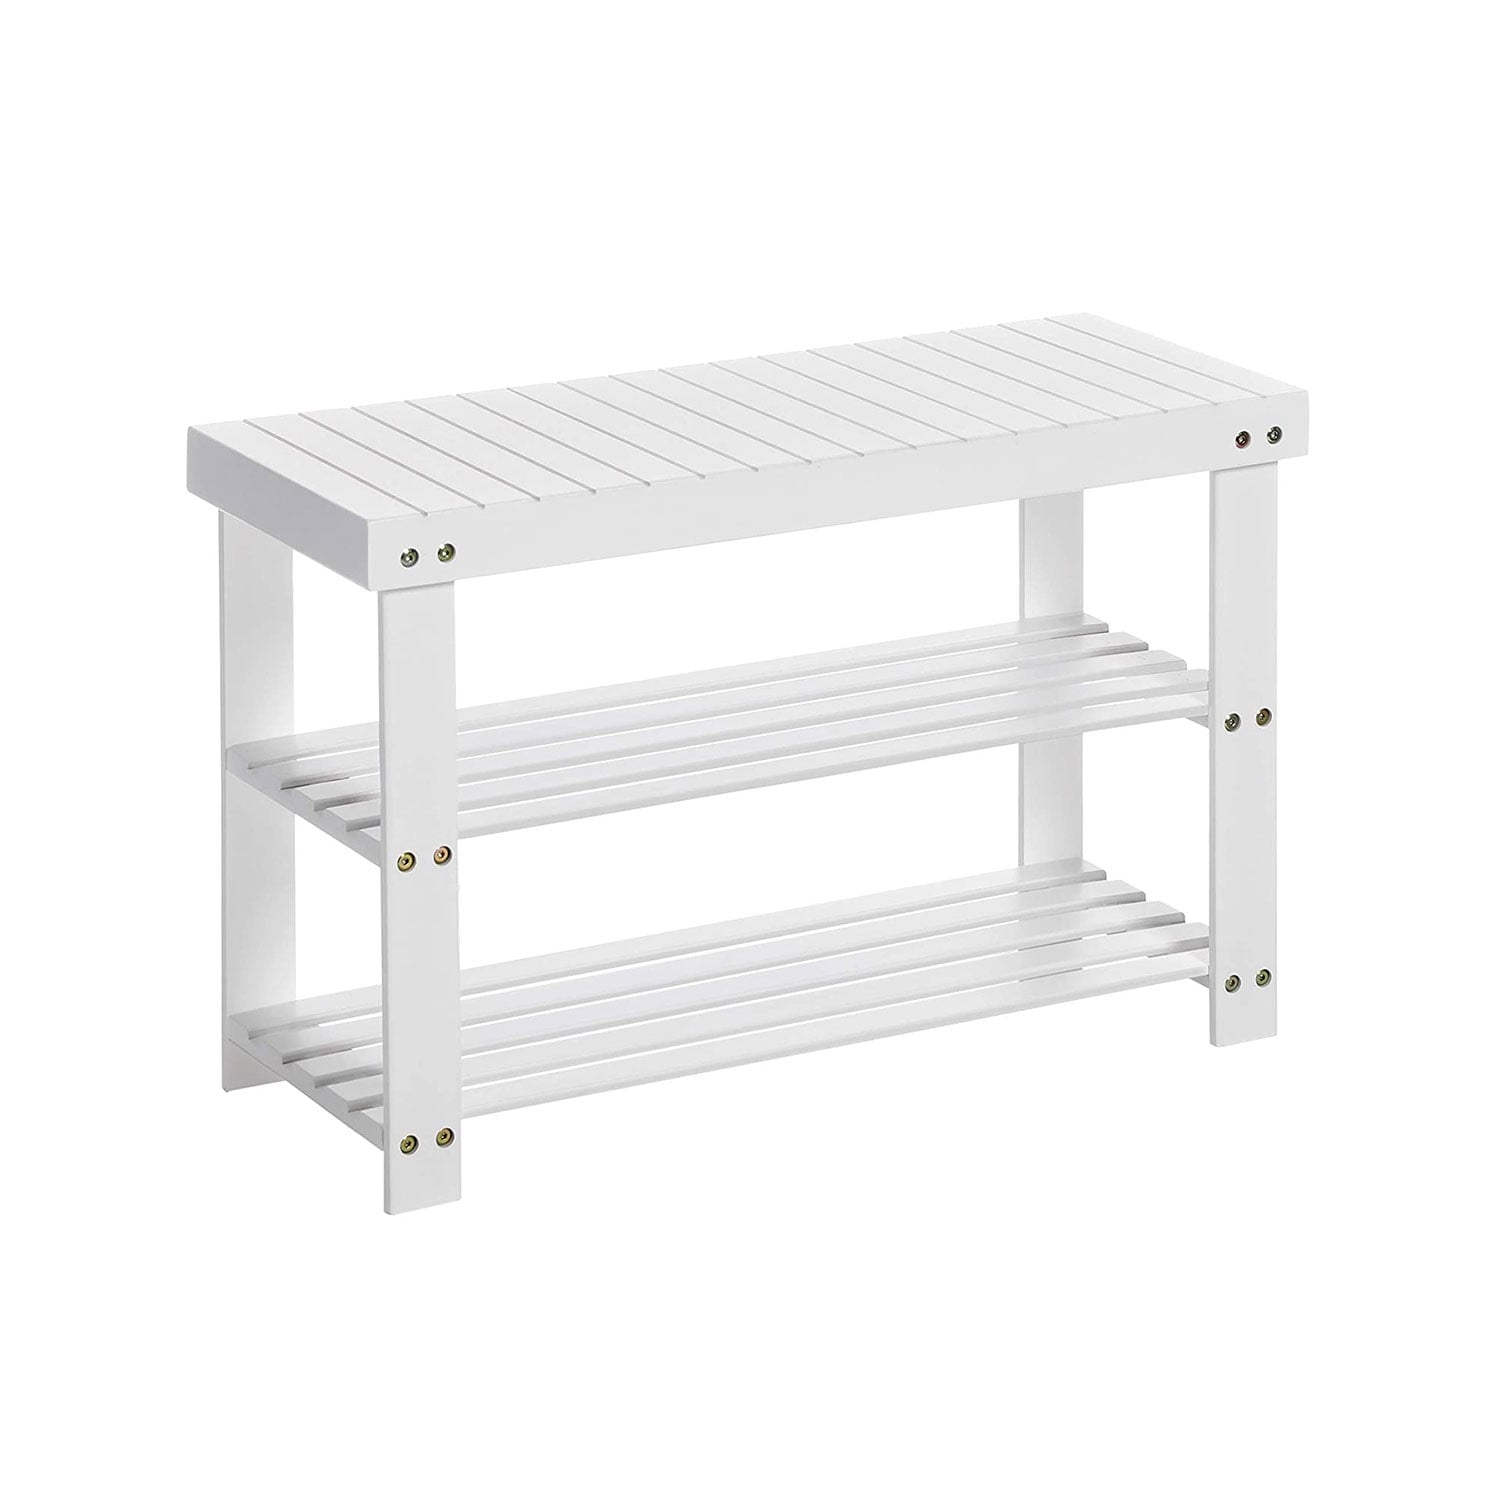 https://ak1.ostkcdn.com/images/products/is/images/direct/a9bc2ff03abd388cba2e6a335715dc6e07c8be34/White-3-Tier-Bamboo-Shoe-Storage-Rack.jpg